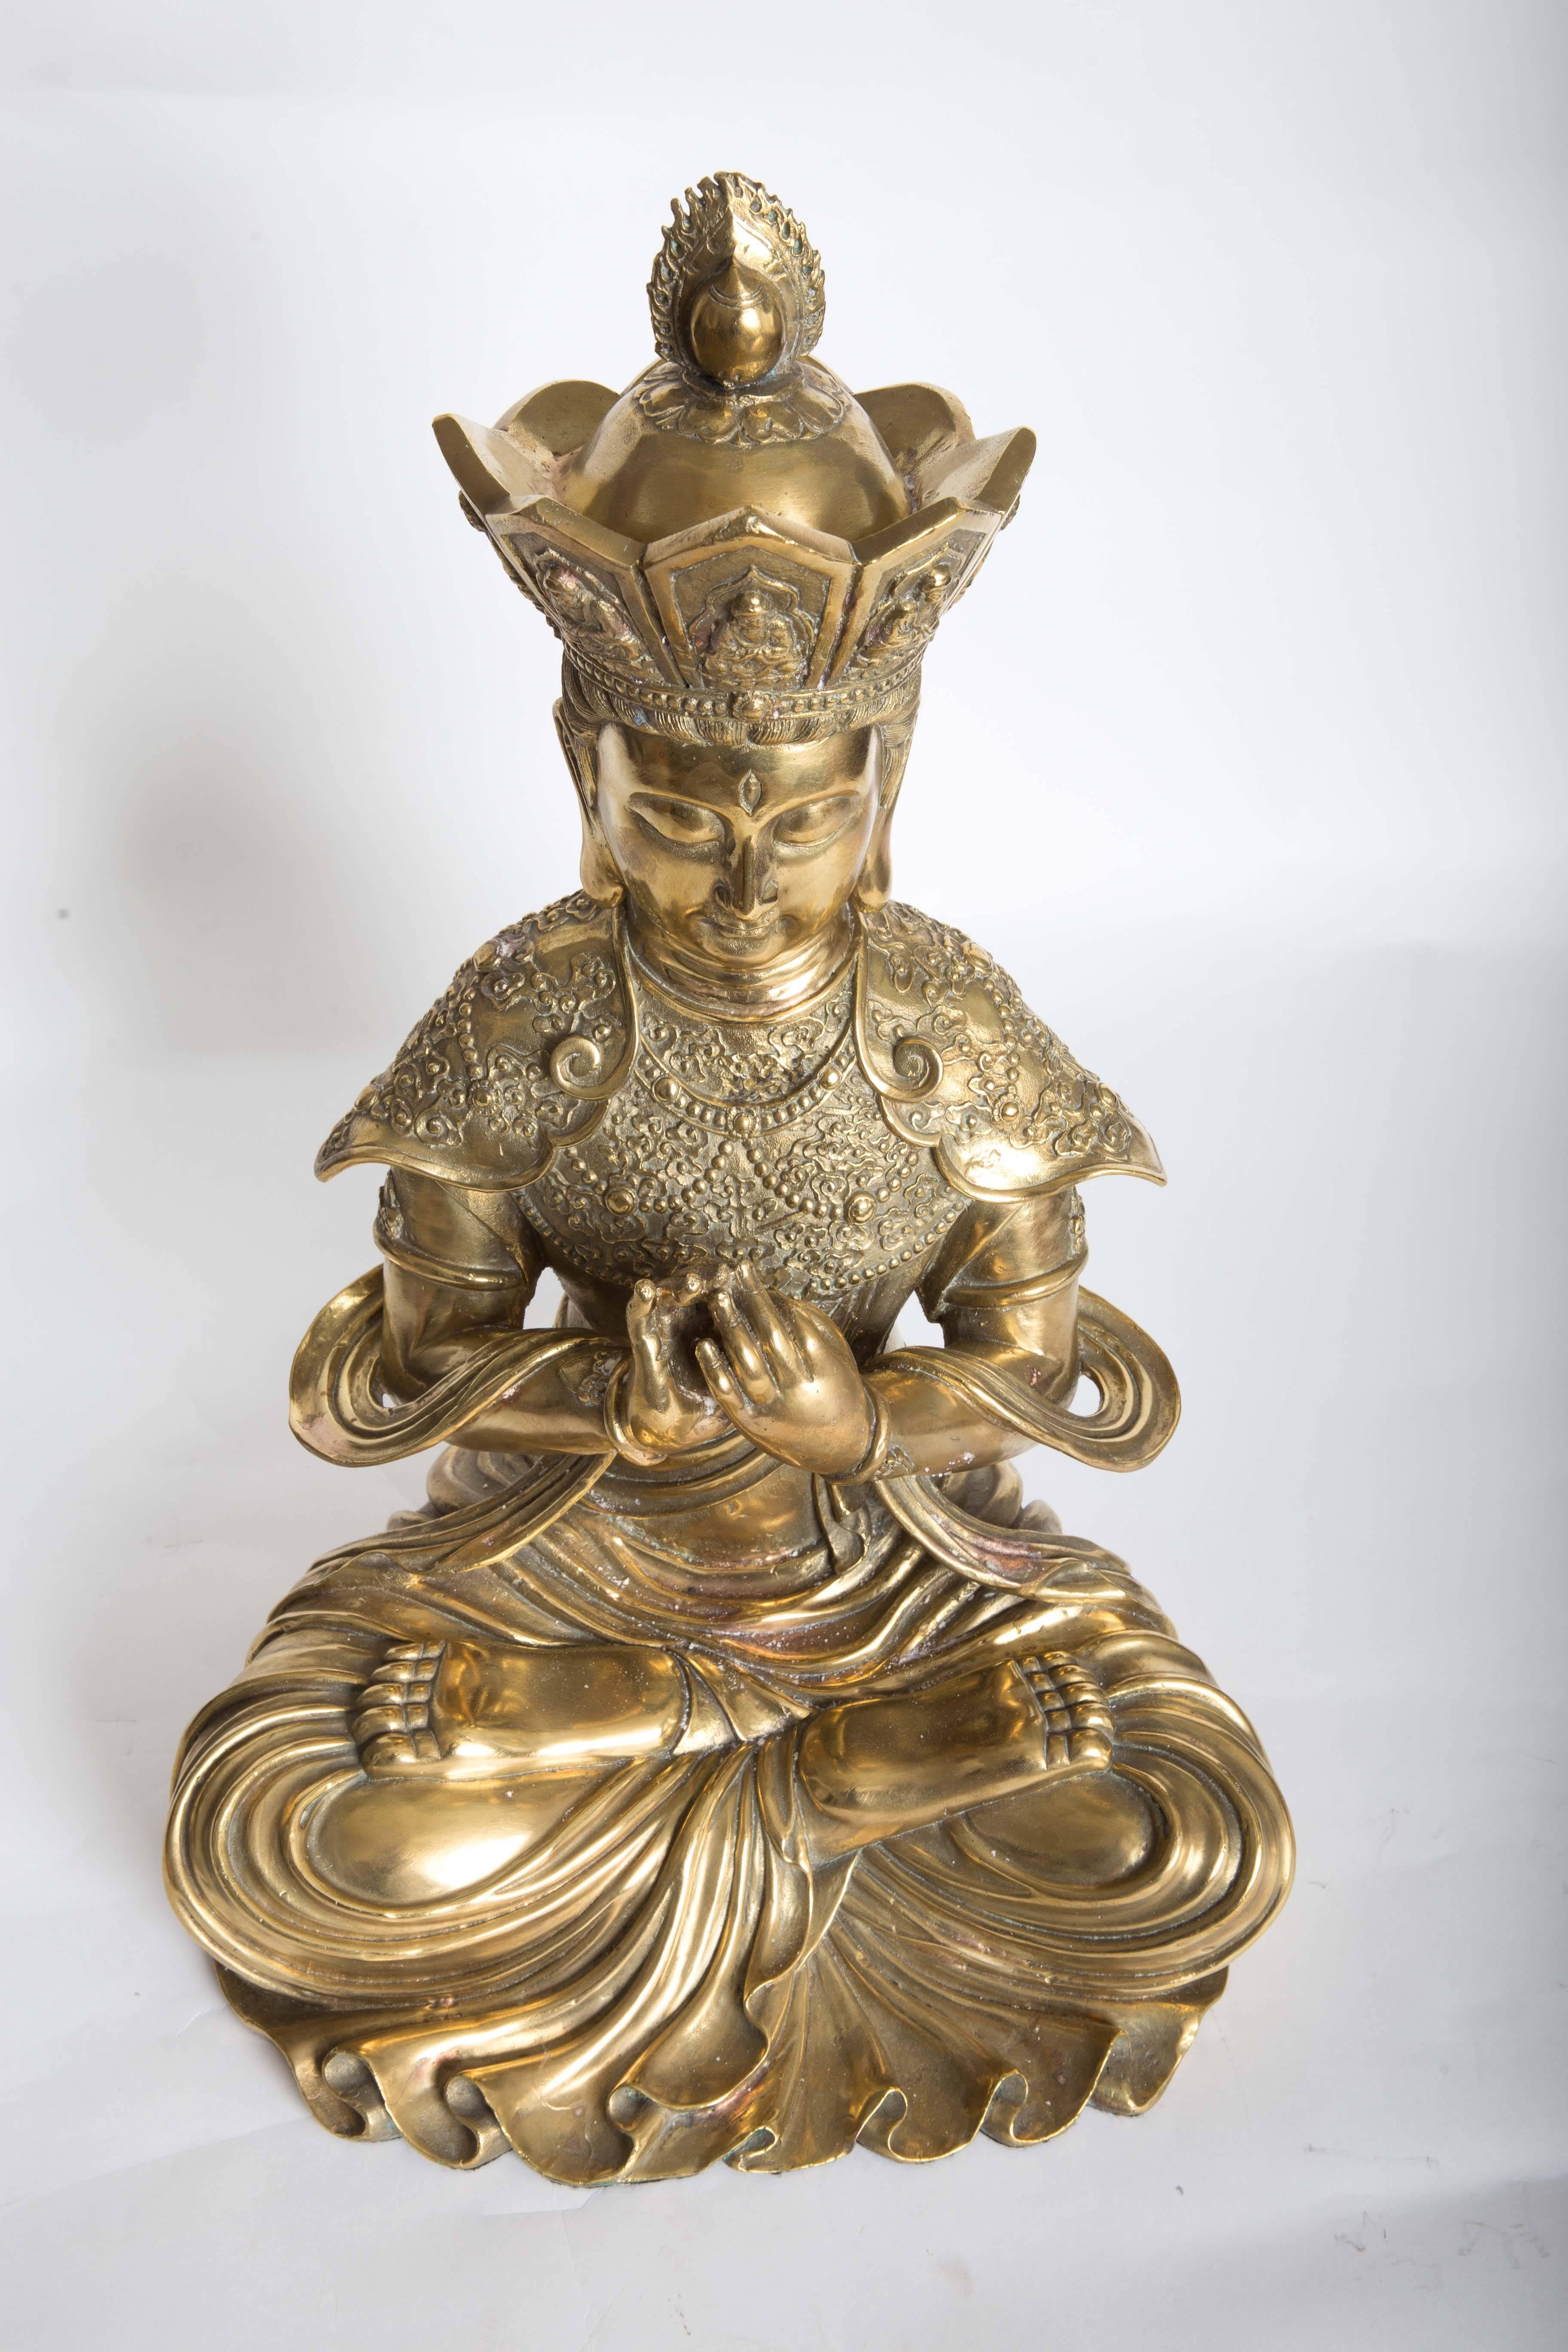 Chinese Intricately Etched Bronze Sculpture of a Seated Diety Figure